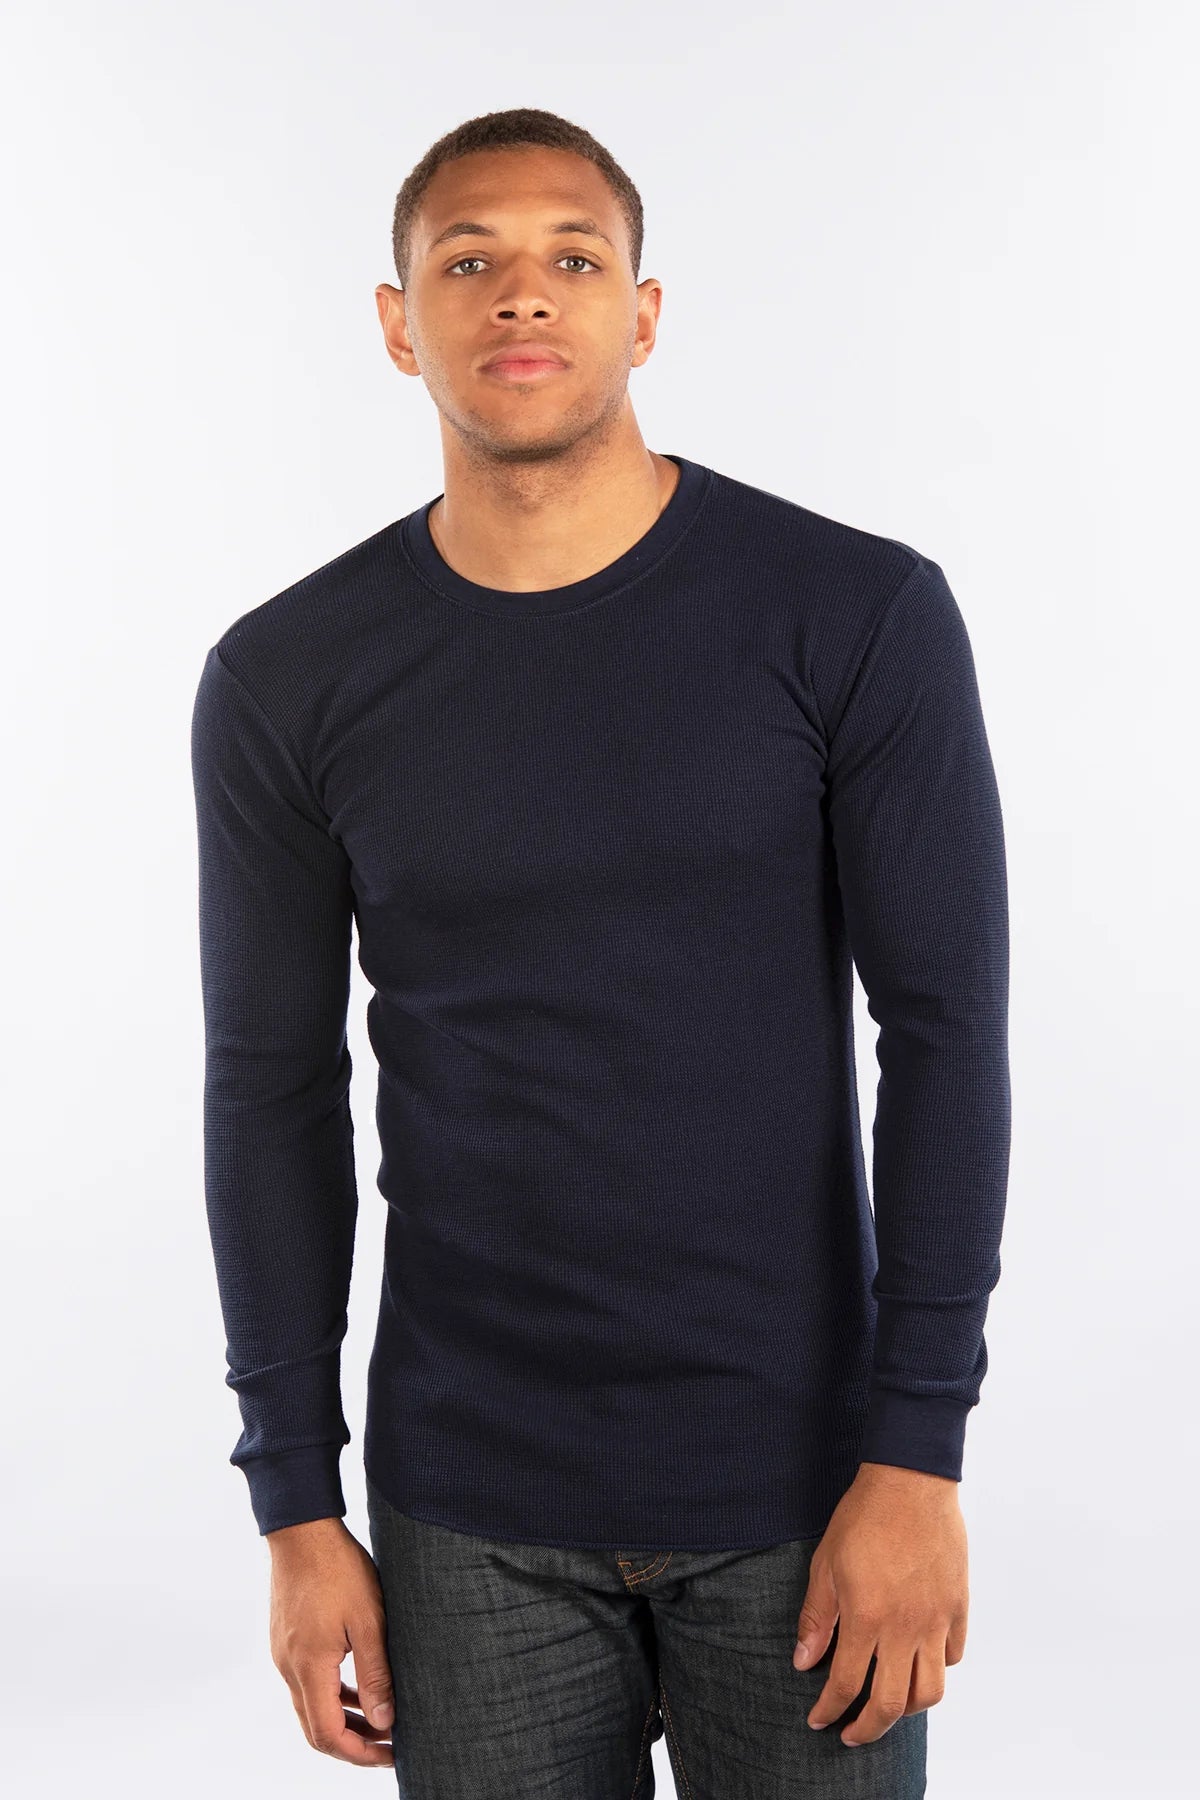 City Lab - Fitted Thermal Shirt - Navy